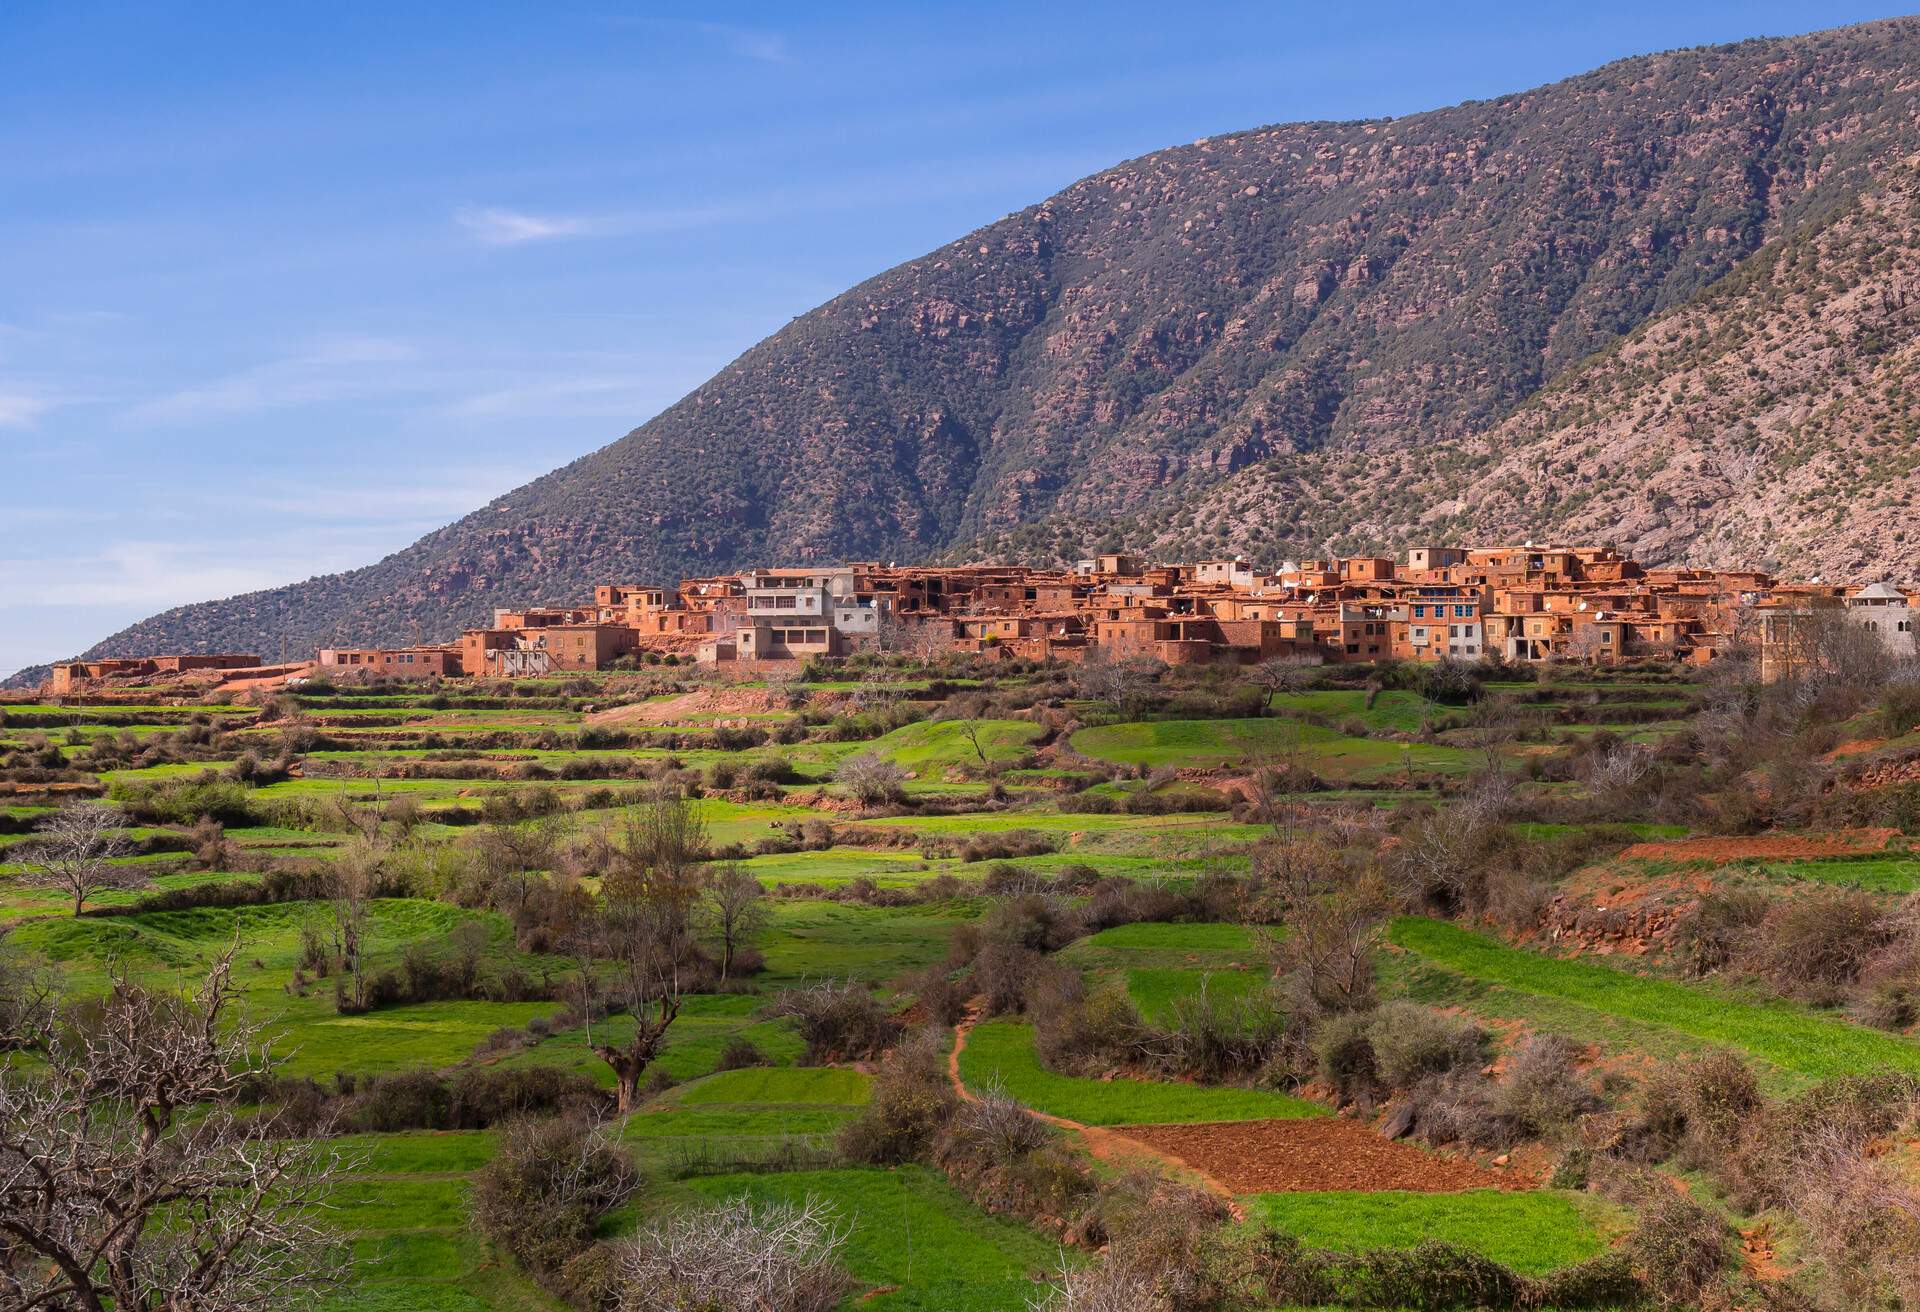 Atlas Mountains, mud-brick village of Anammer at the back, Ourika Valley, Marrakech-Tensift-Al Haouz, Morocco